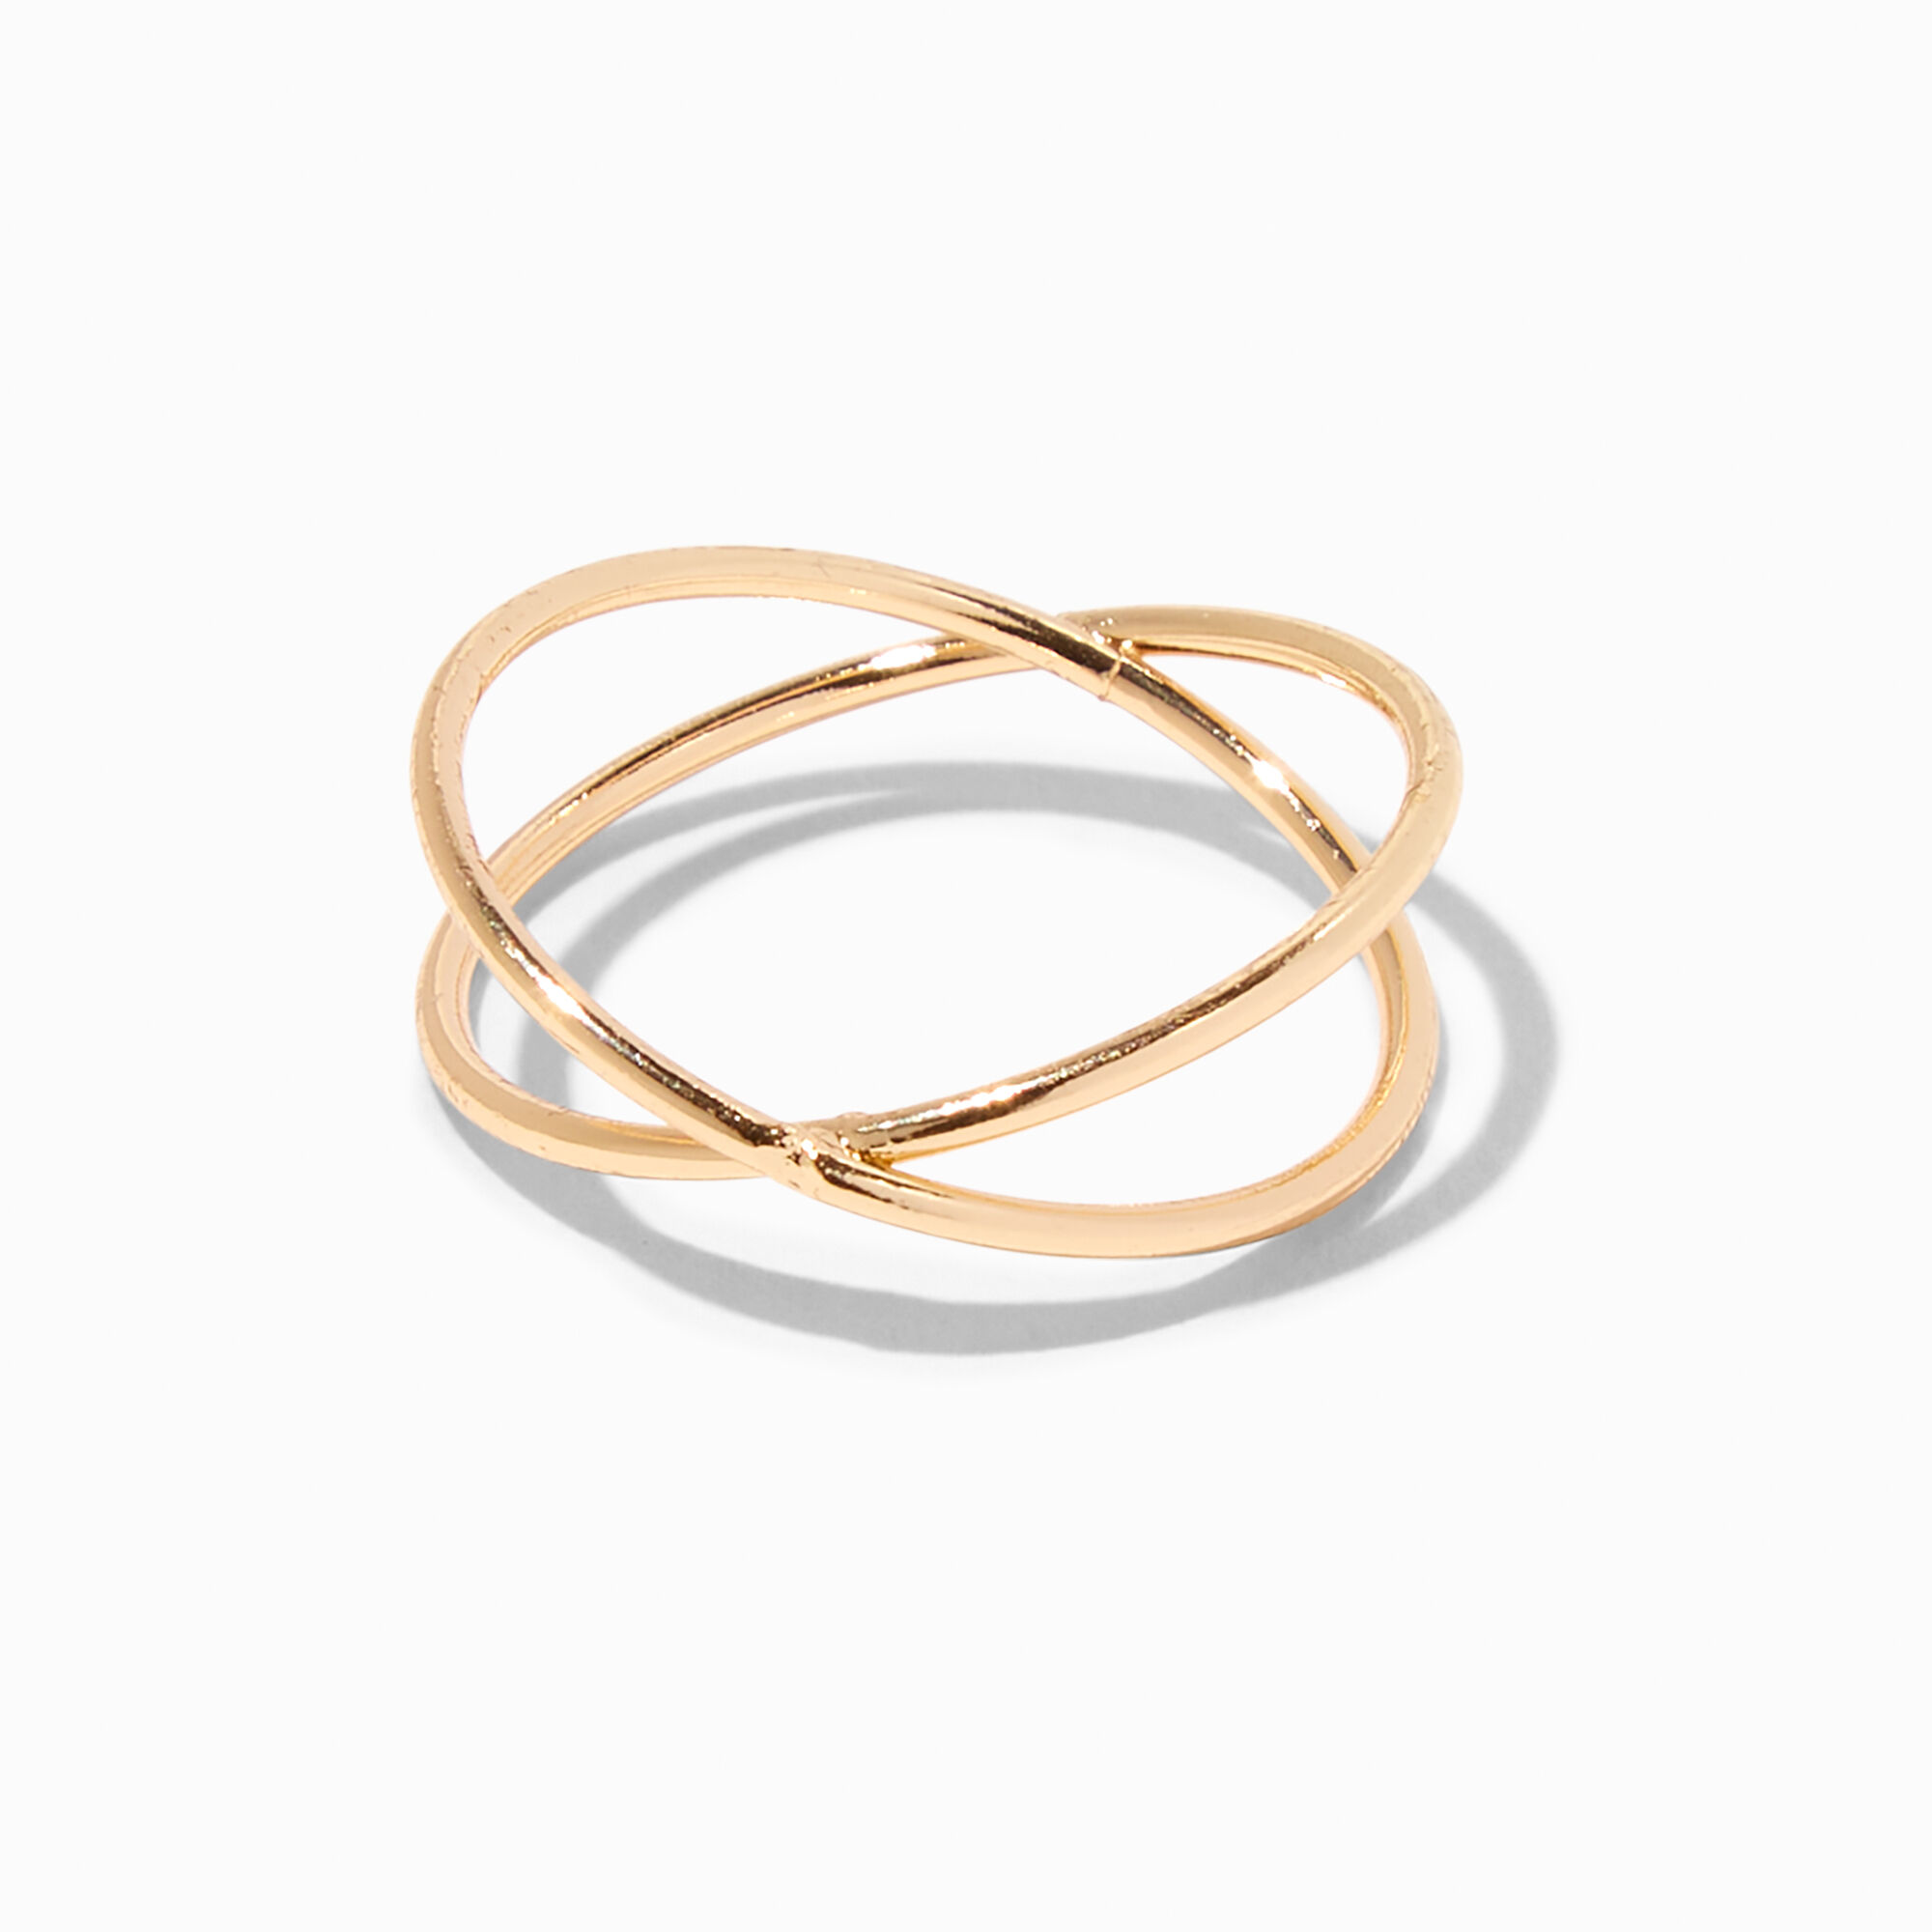 View Claires Tone Criss Cross Ring Gold information